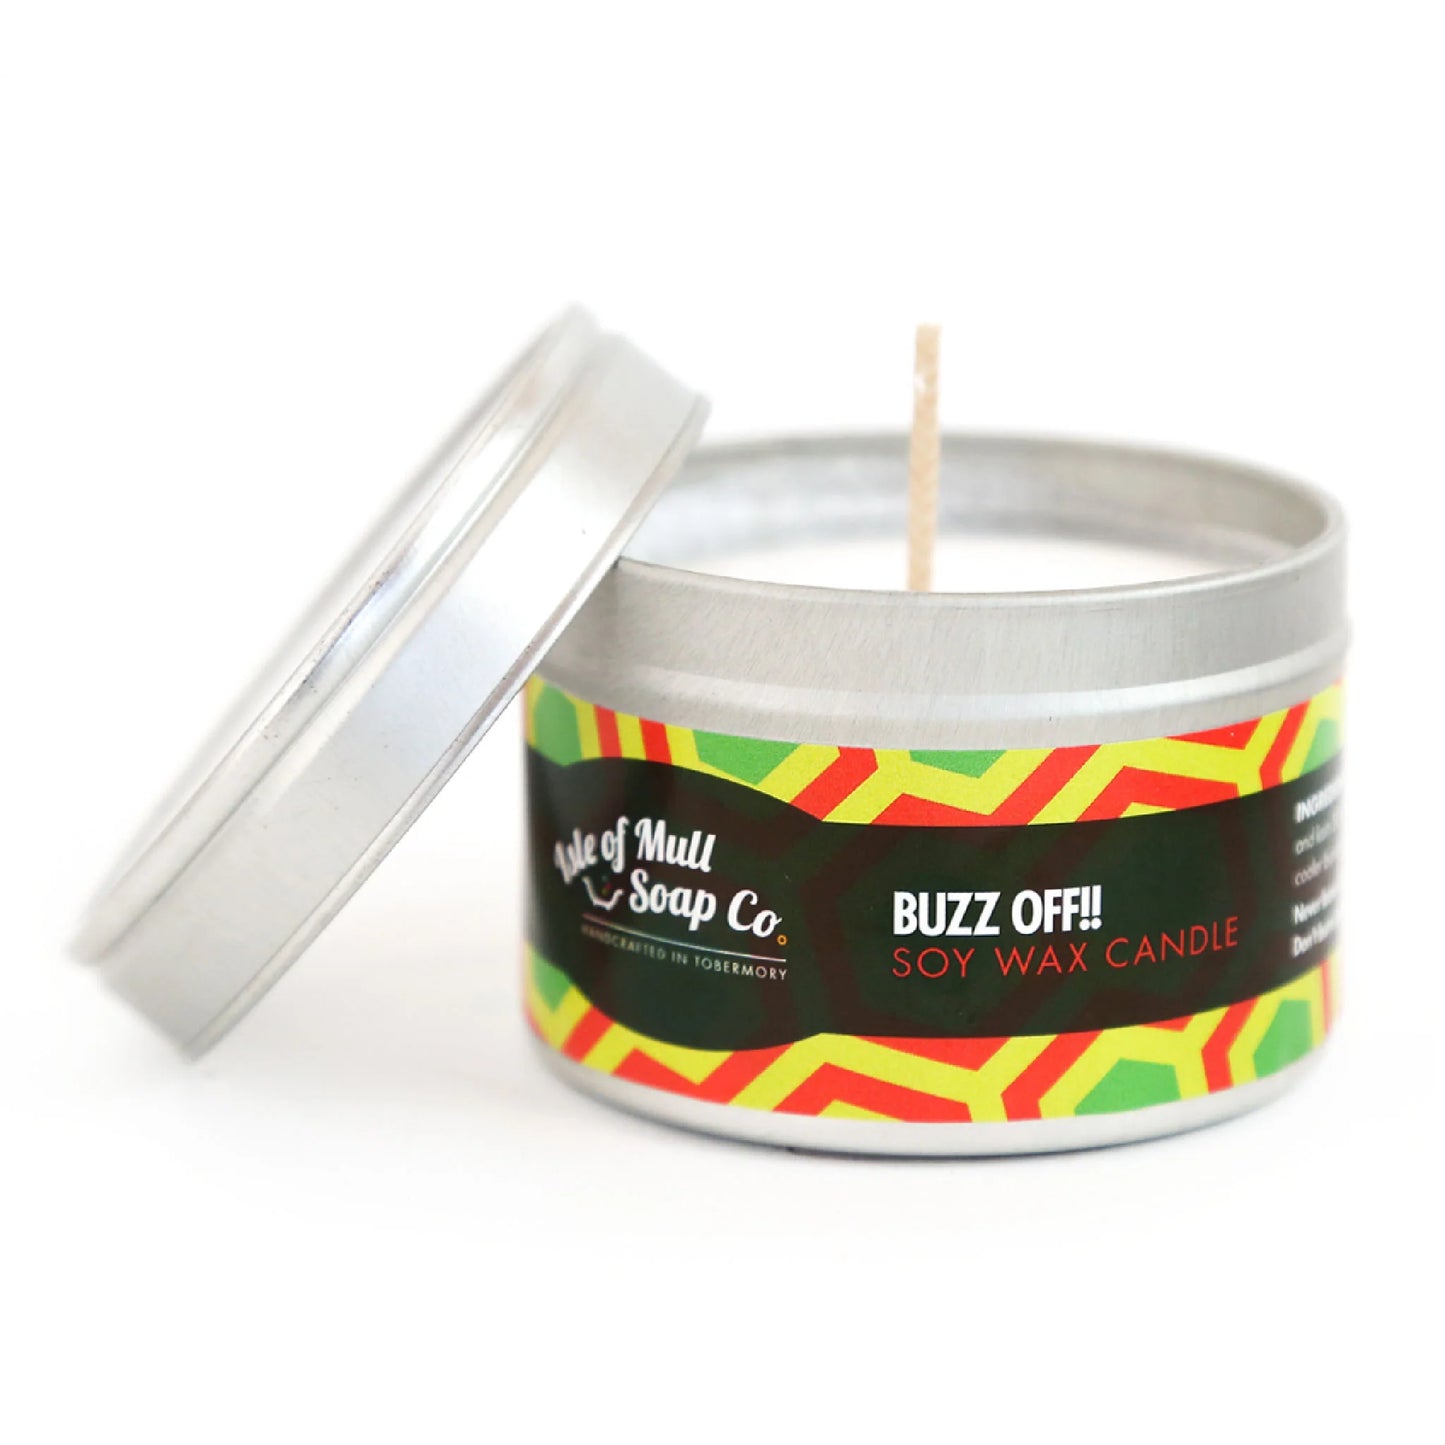 Isle of Mull Buzz Off Candle Tin